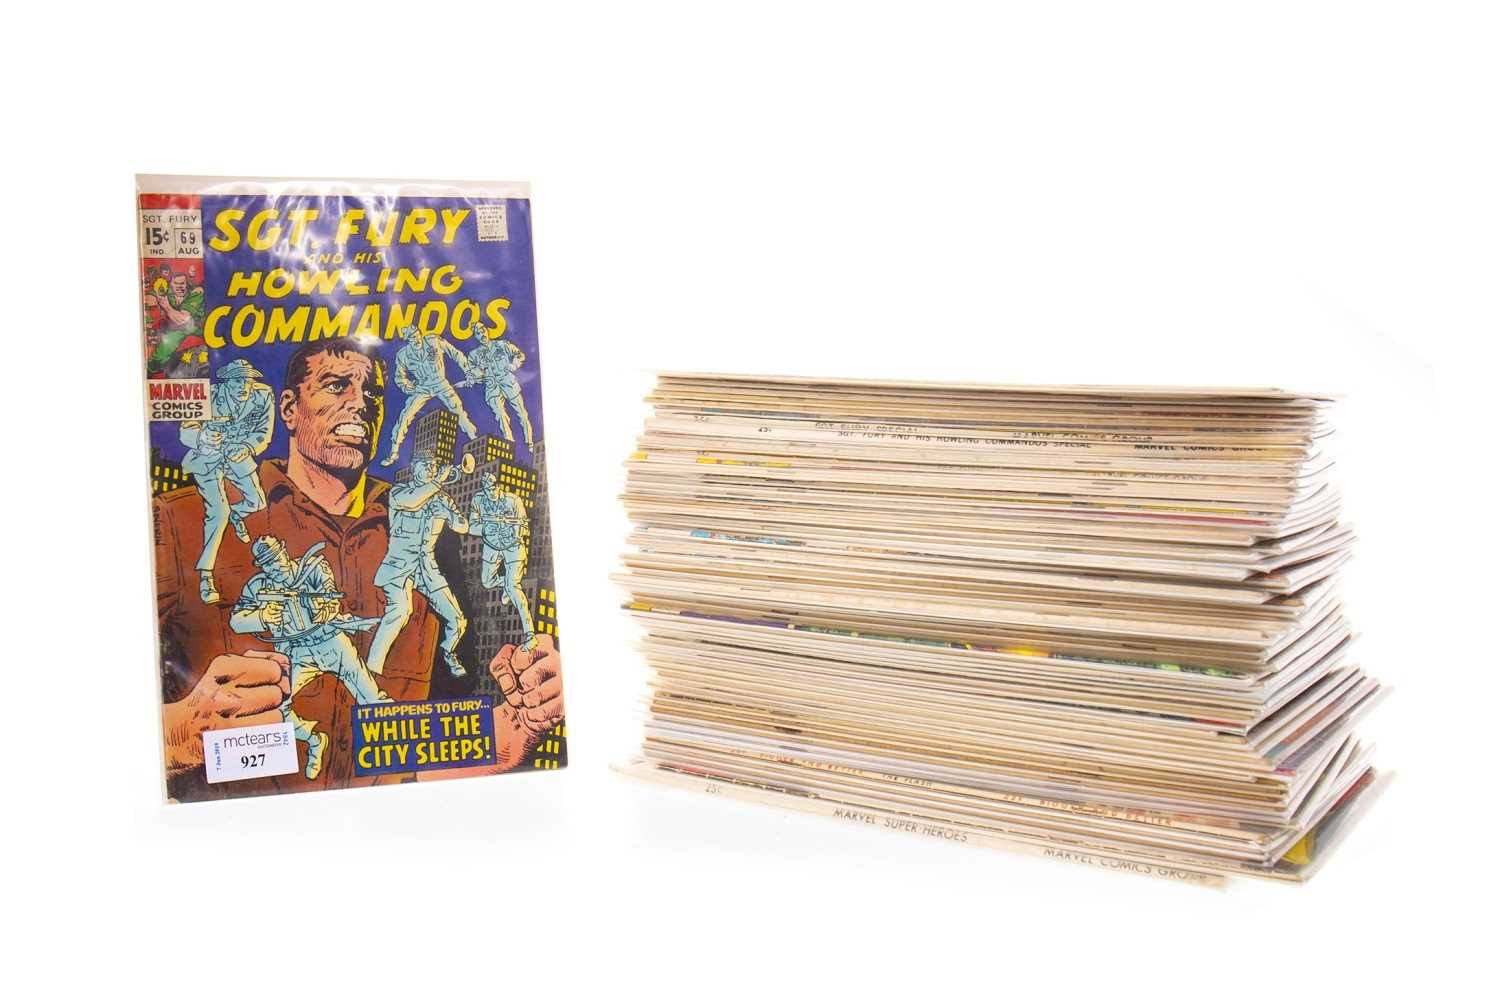 Lot 927 - A COLLECTION OF MARVEL COMICS INCLUDING SGT. FURY, KA-XAR AND THE FLASH